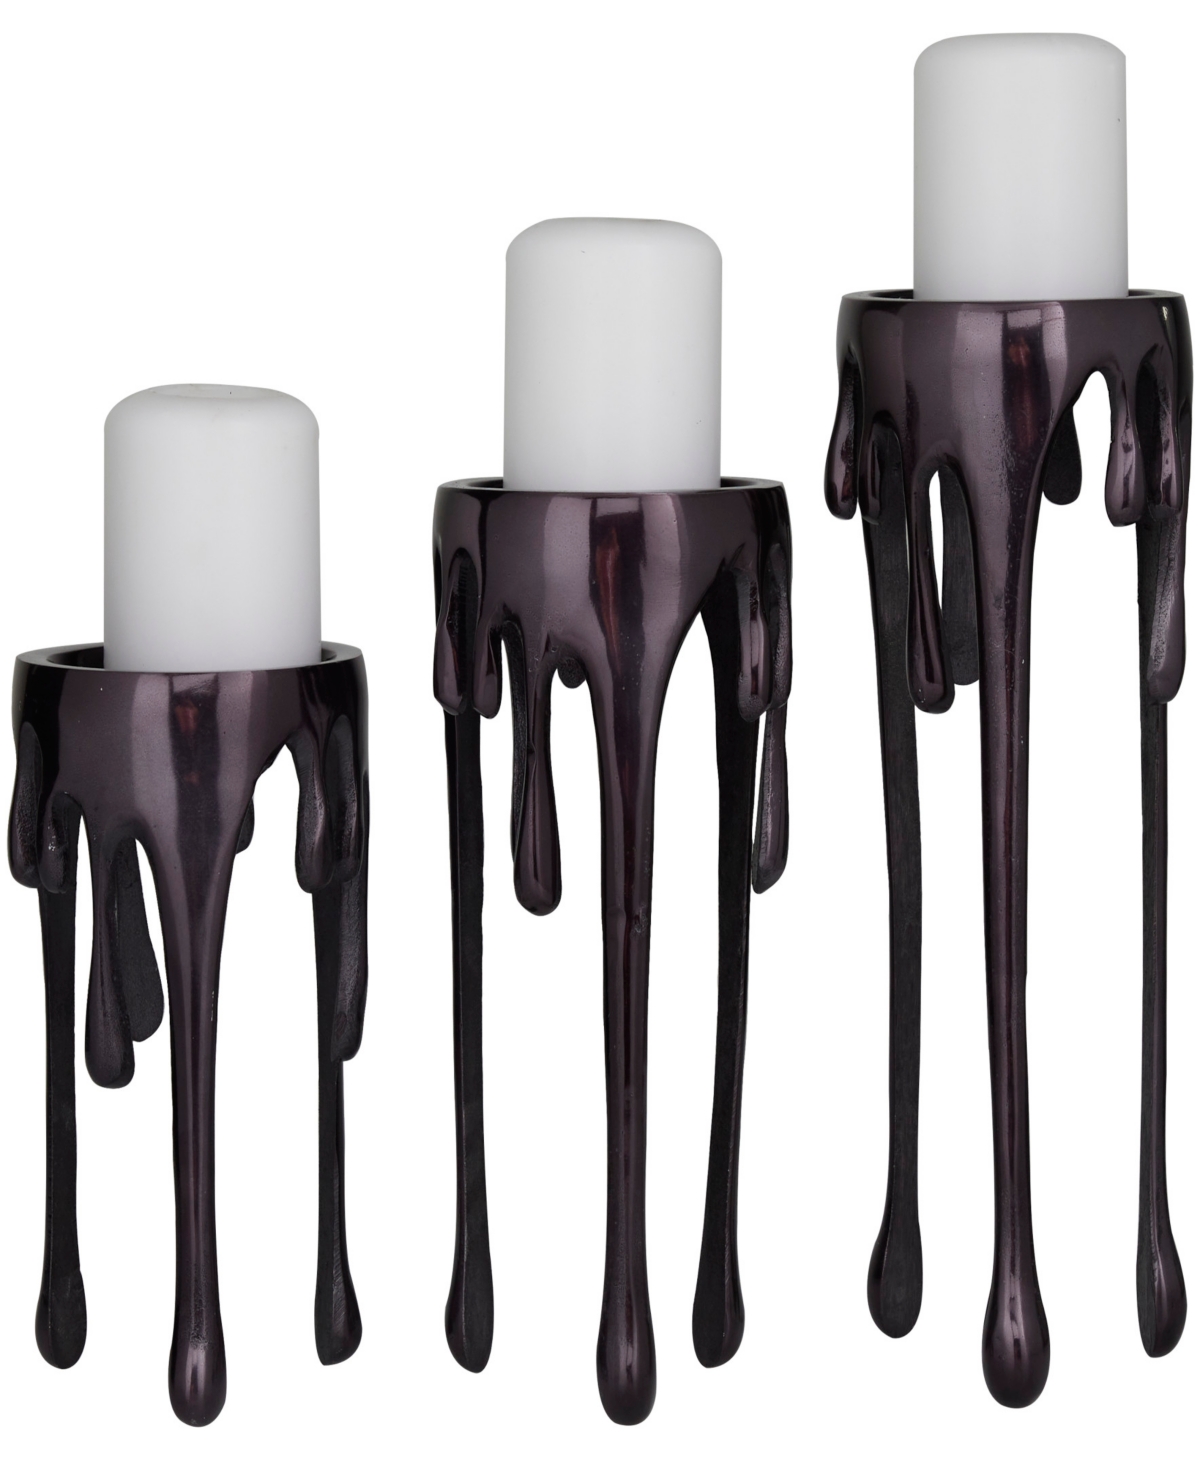 Cosmoliving Aluminum Pillar Candle Holder With Dripping Melting Designed Legs Set Of 3 In Black